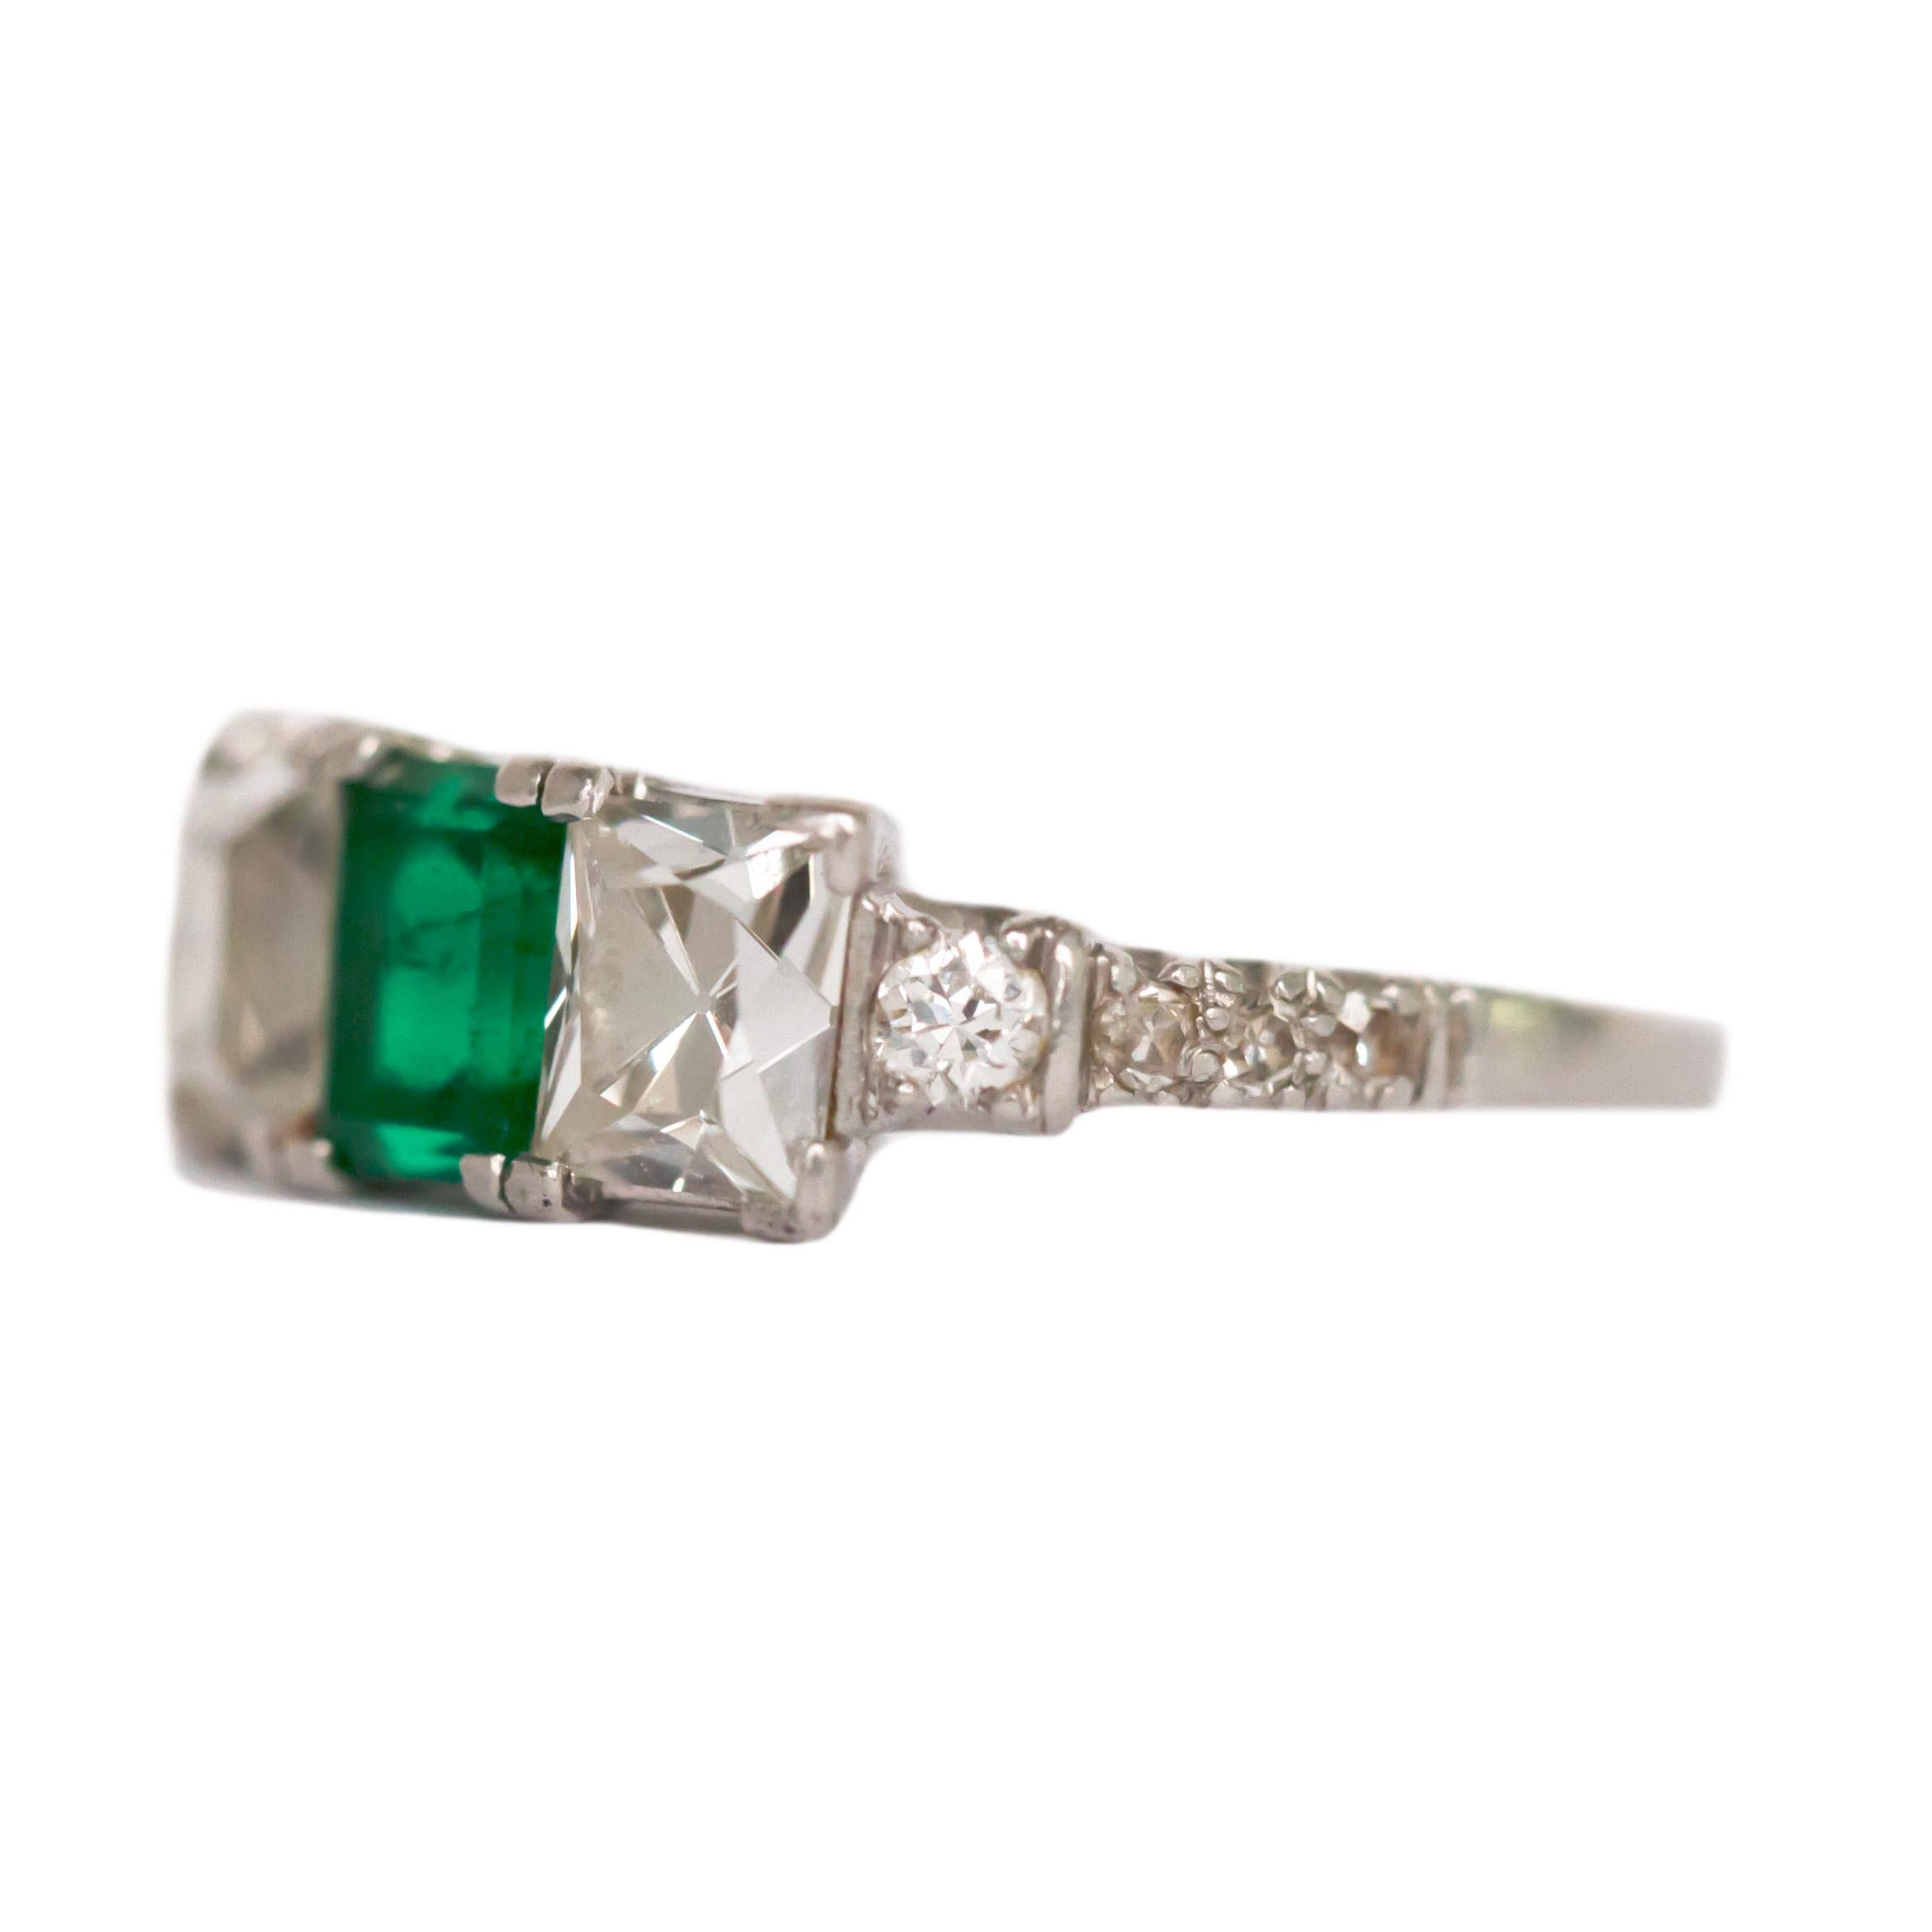 Ring Size: 6.75
Metal Type: Platinum  [Hallmarked, and Tested]
Weight: 4.5  grams

Center Stone Details:
Type: Emerald, Natural, Colombian 
Weight: .90 carat
Cut: Emerald
Color: Green 

2 Peruzzi Cut Side Diamond Details:
Weight: 1.70 carat, total